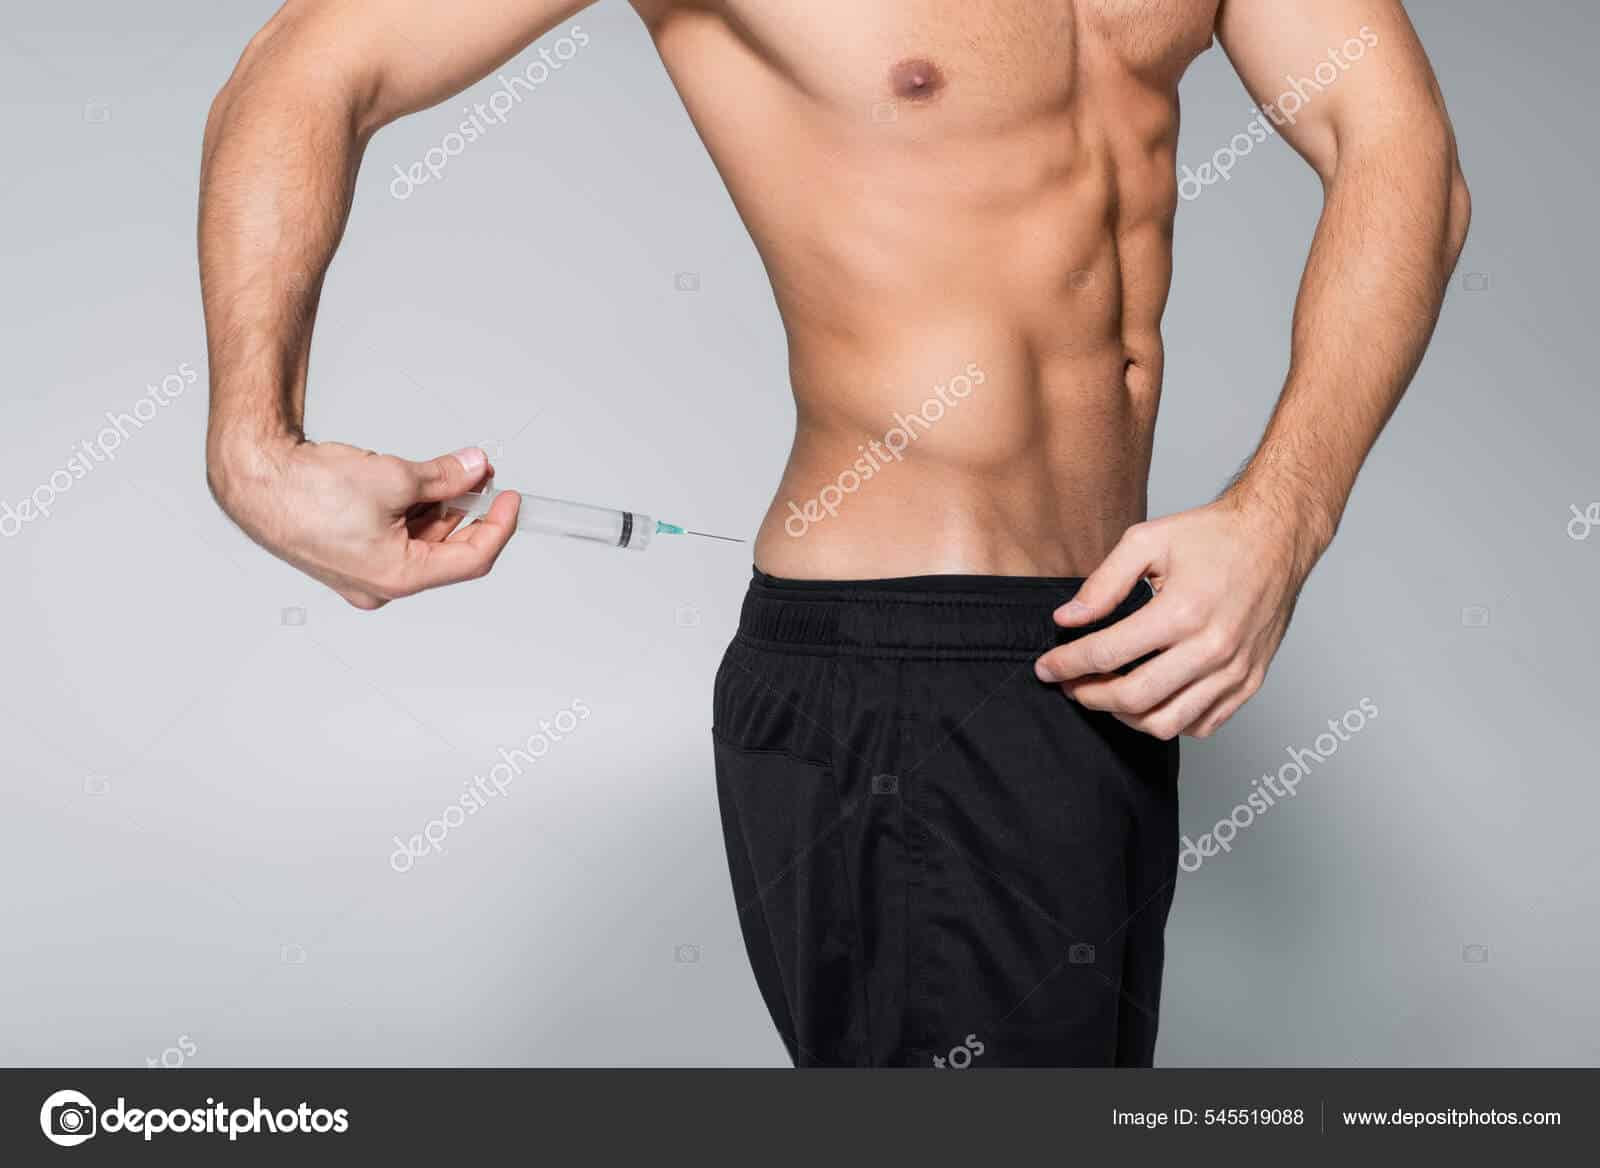 Steroid injection